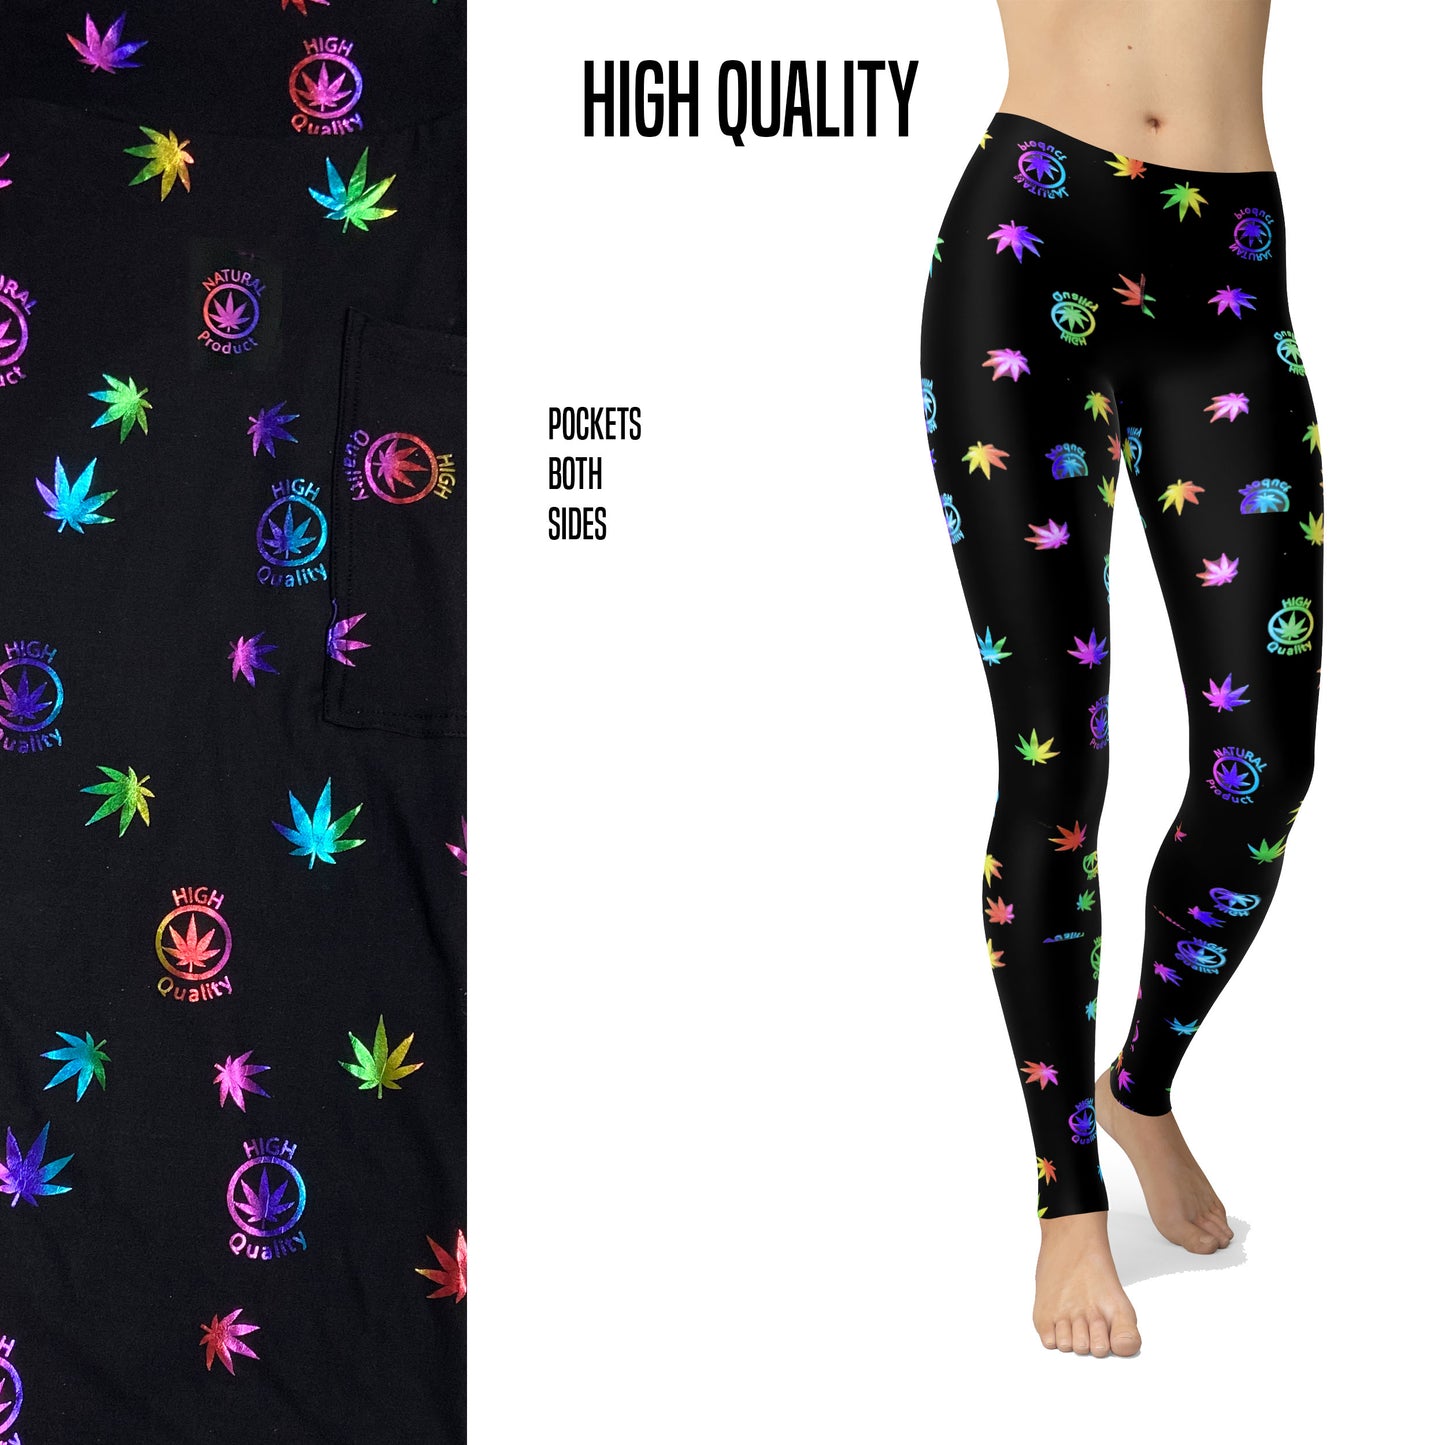 High Quality Glitter leggings and capris with pockets